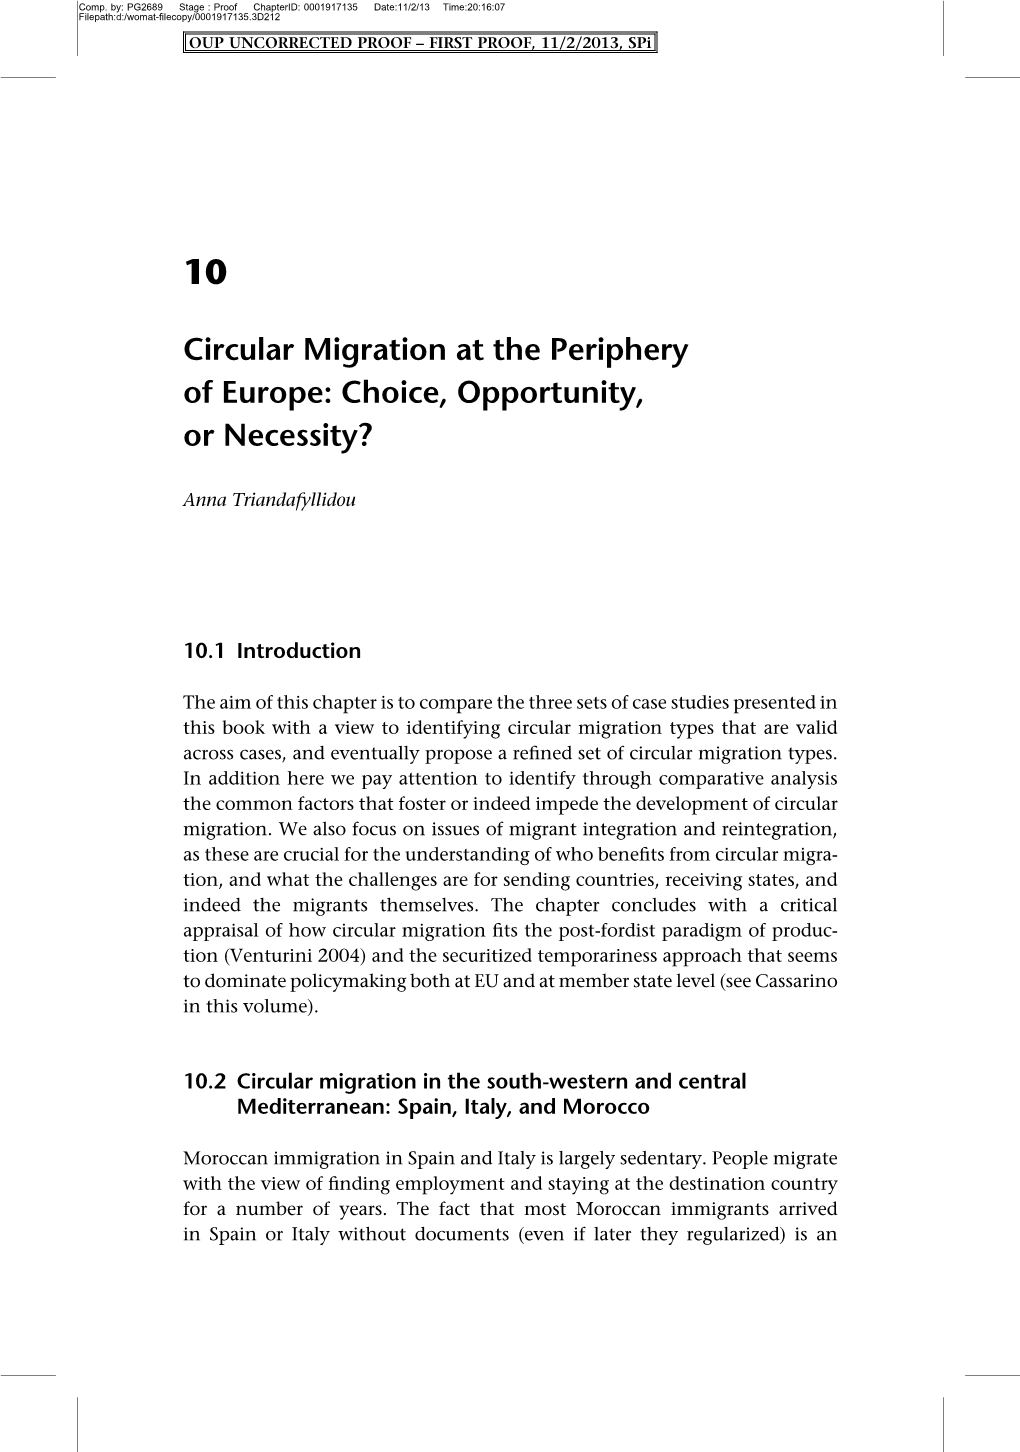 Circular Migration at the Periphery of Europe: Choice, Opportunity, Or Necessity?